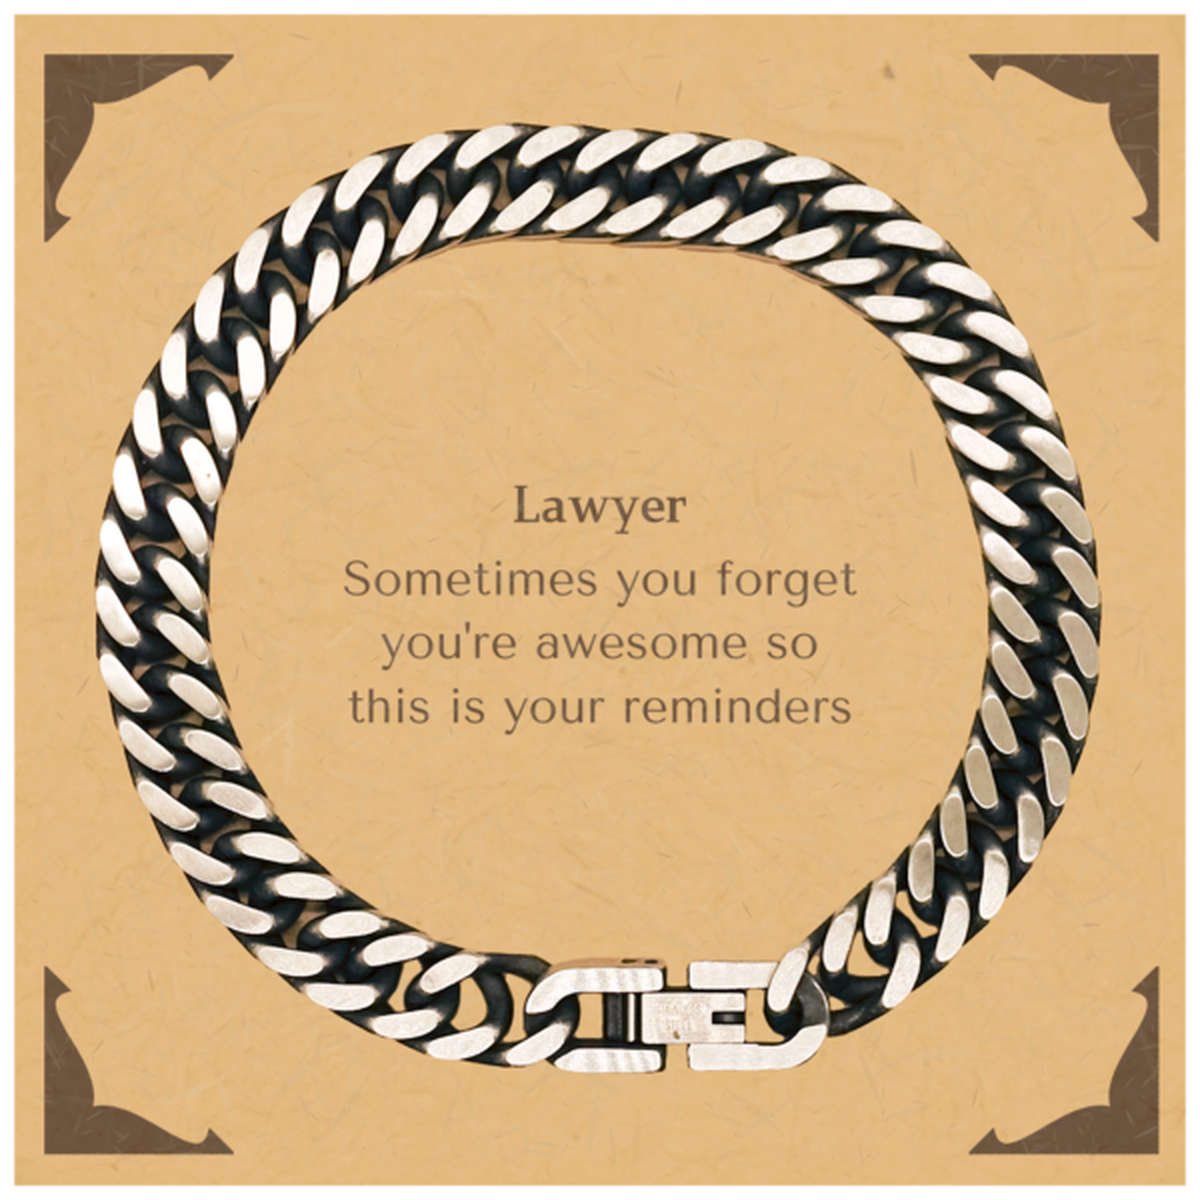 Sentimental Lawyer Cuban Link Chain Bracelet, Lawyer Sometimes you forget you're awesome so this is your reminders, Graduation Christmas Birthday Gifts for Lawyer, Men, Women, Coworkers